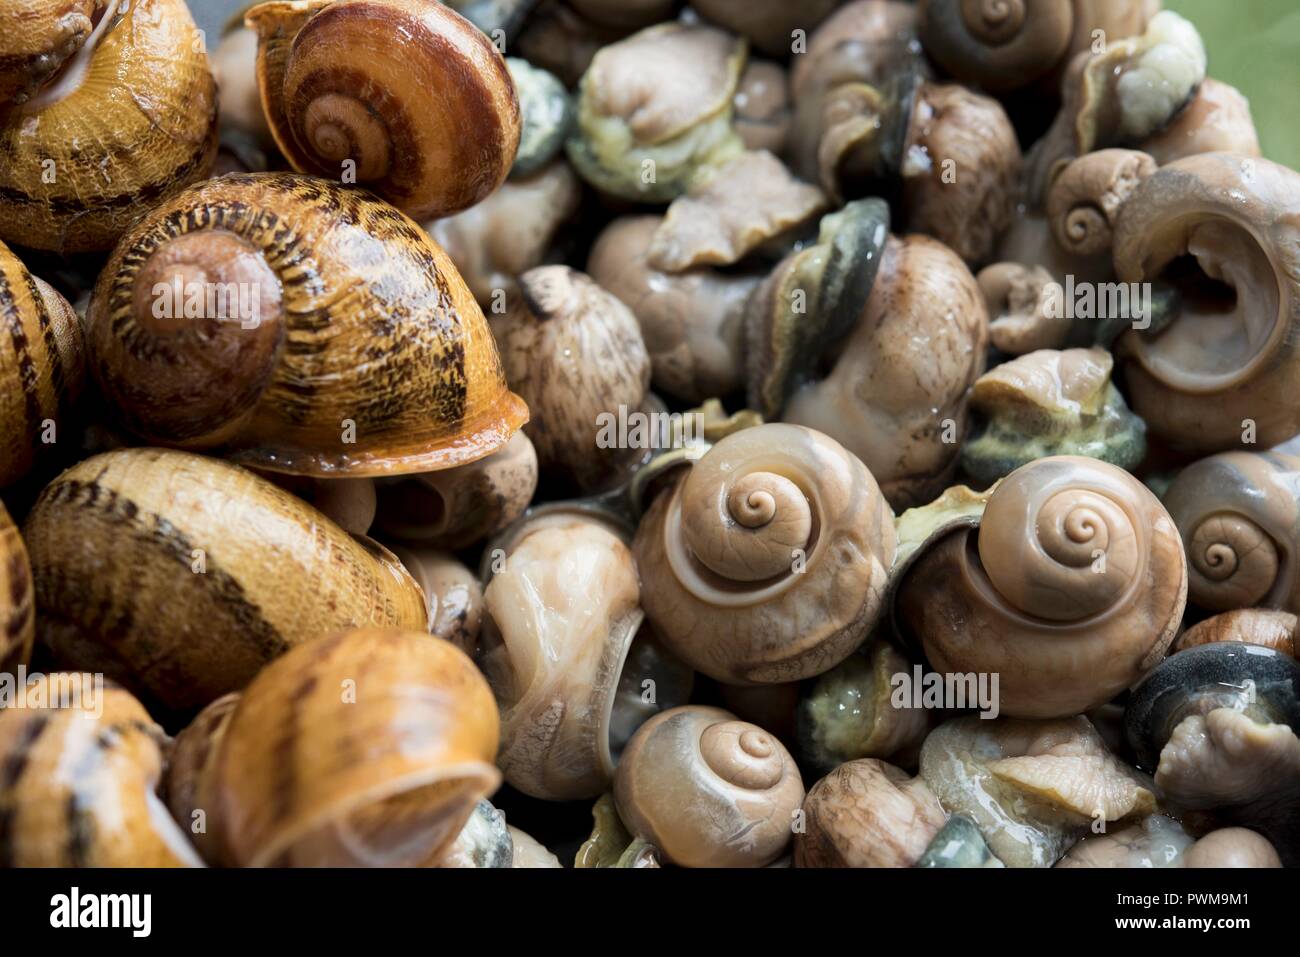 Edible snails, some without shells Stock Photo